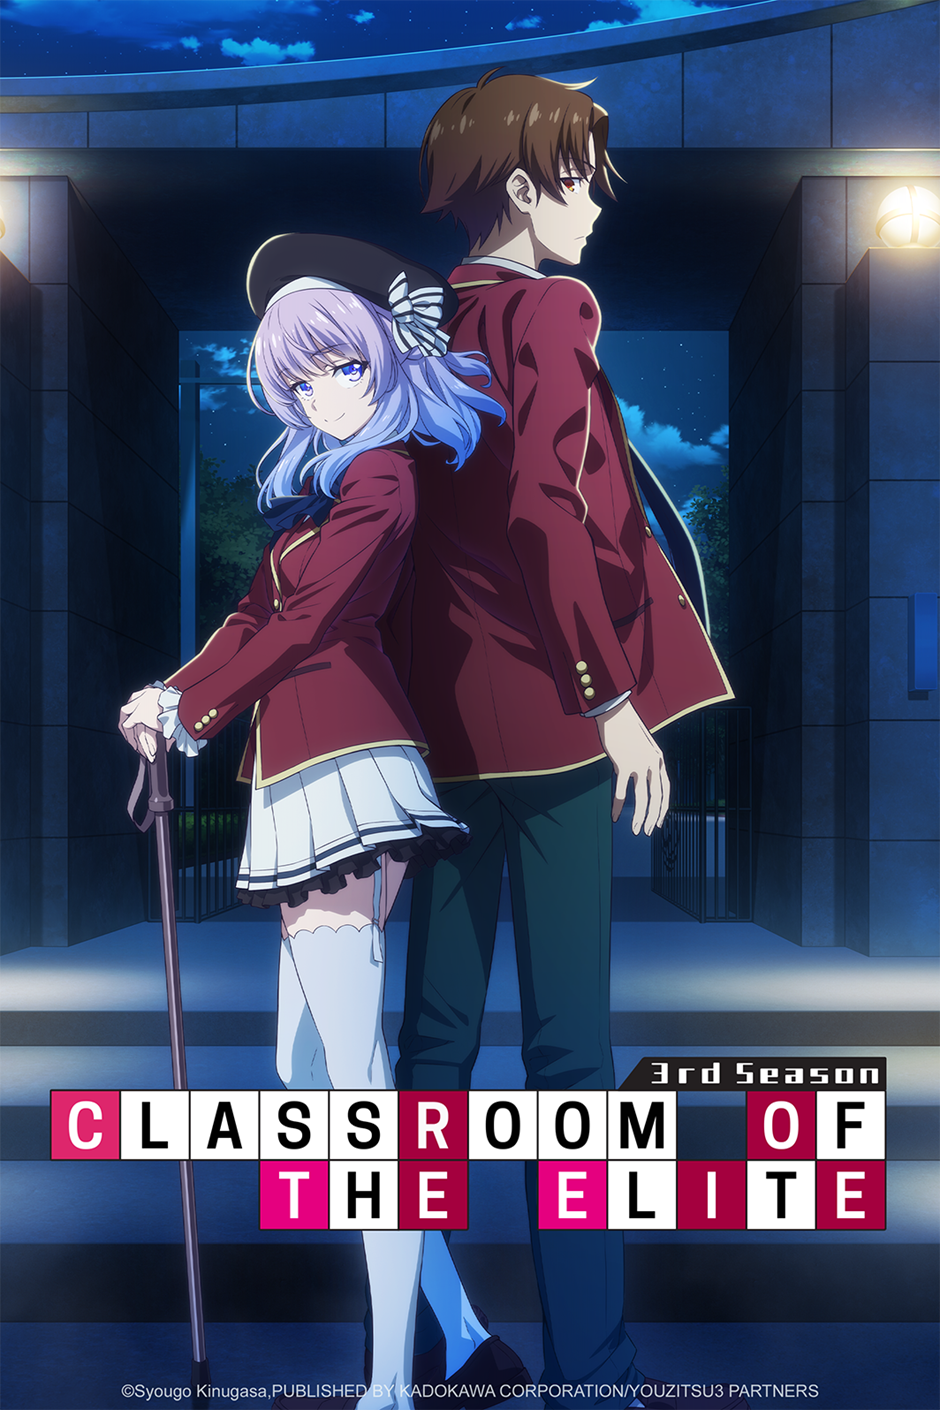 Classroom of the Elite Season 2 (English Dub) The material has to be  created. - Watch on Crunchyroll